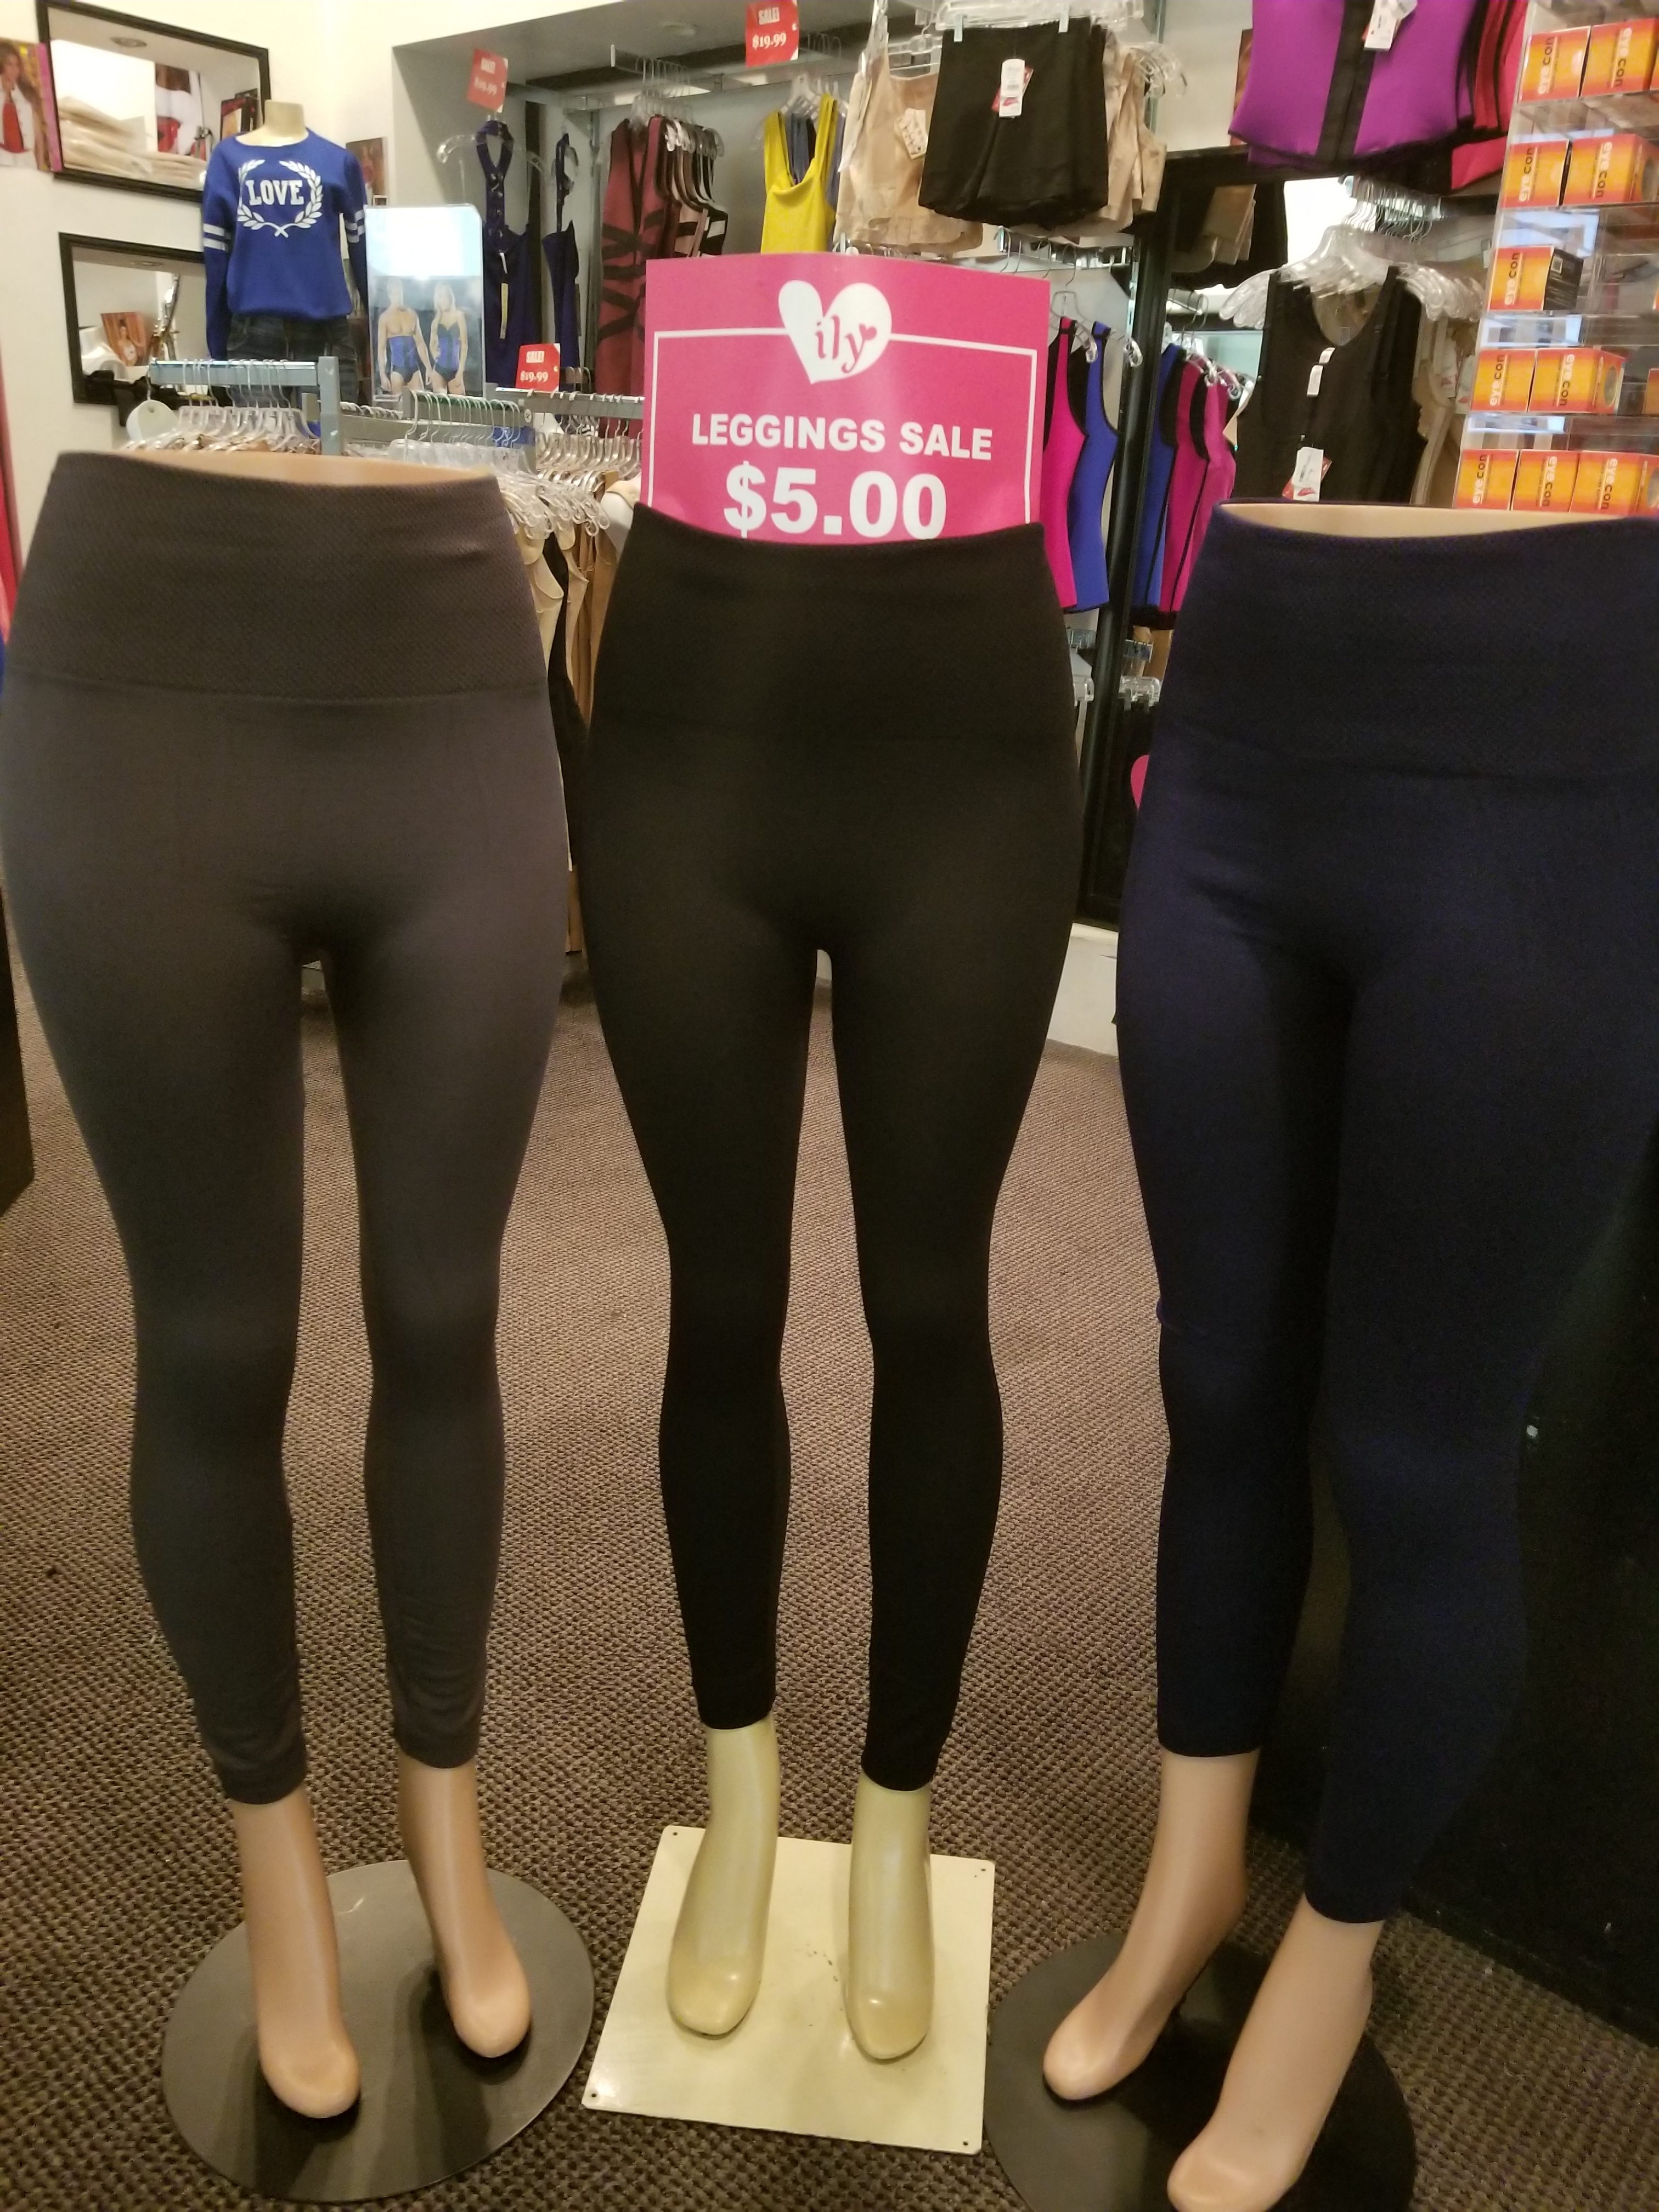 Ily Fajas/Shapewear up to 50% off today! - Palisades Center